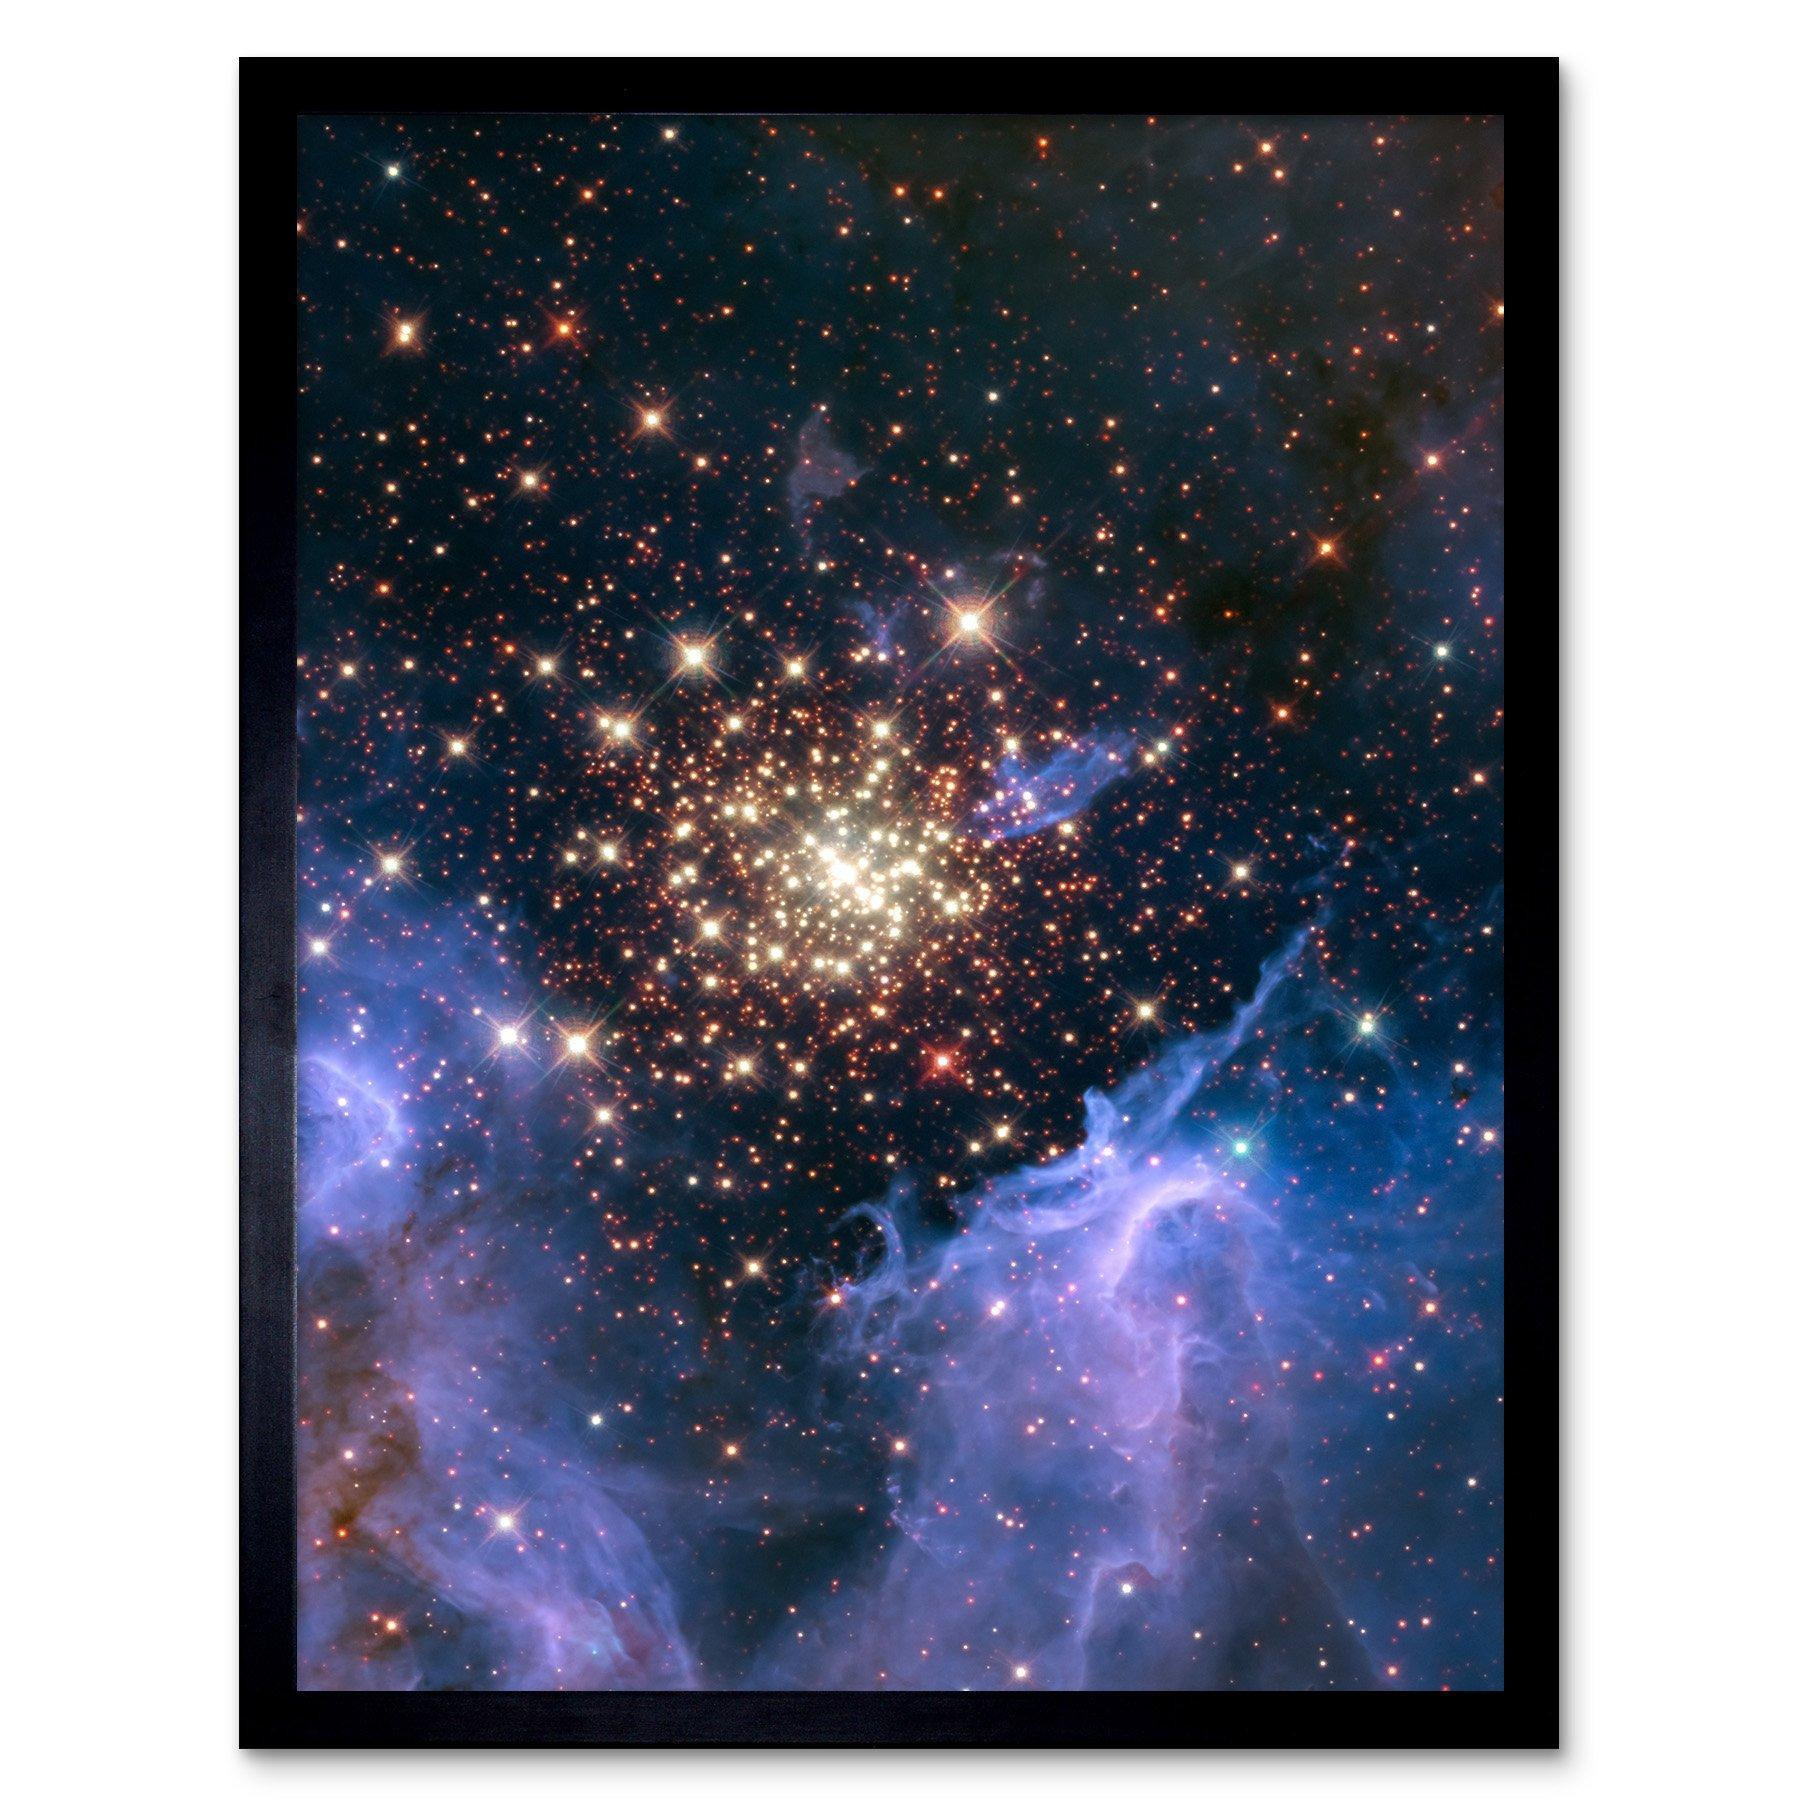 Hubble Space Telescope Image Starburst Cluster NGC 3603 Nebula Resembles Celestial Fireworks Surrounded By Clouds Of Interstellar Gas And Dust Art Print Framed Poster Wall Decor - image 1